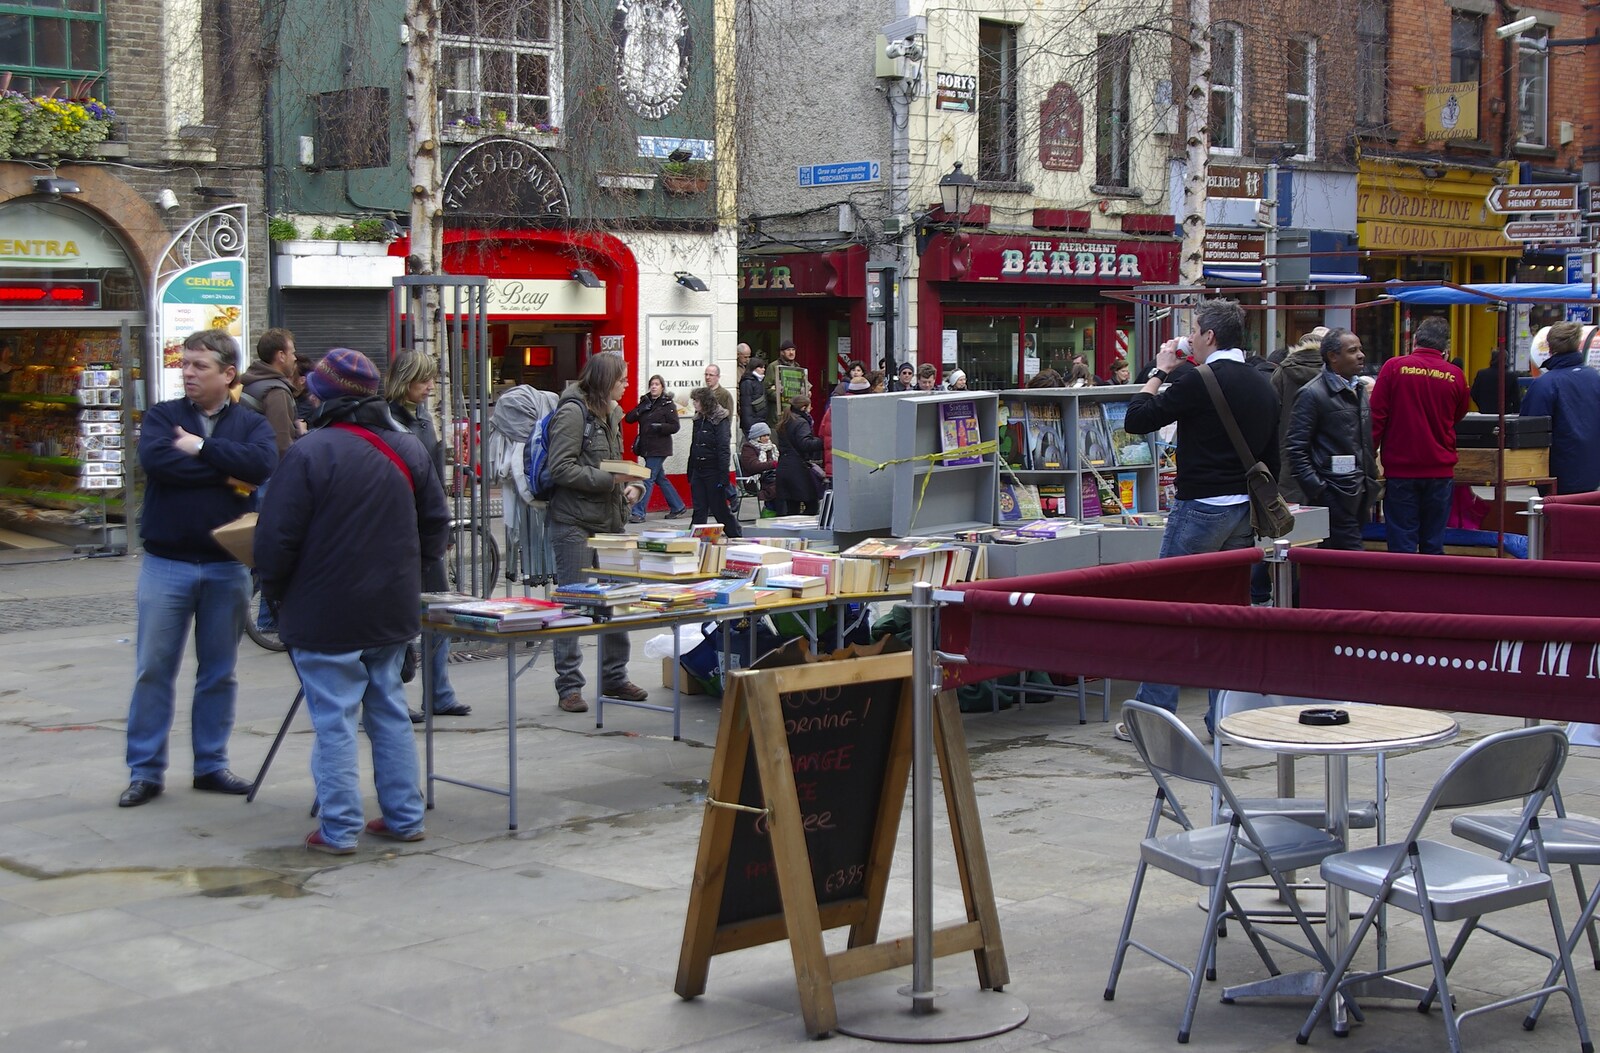 An outdoor book sale in Temple Bar from Easter in Dublin, Ireland - 21st March 2008